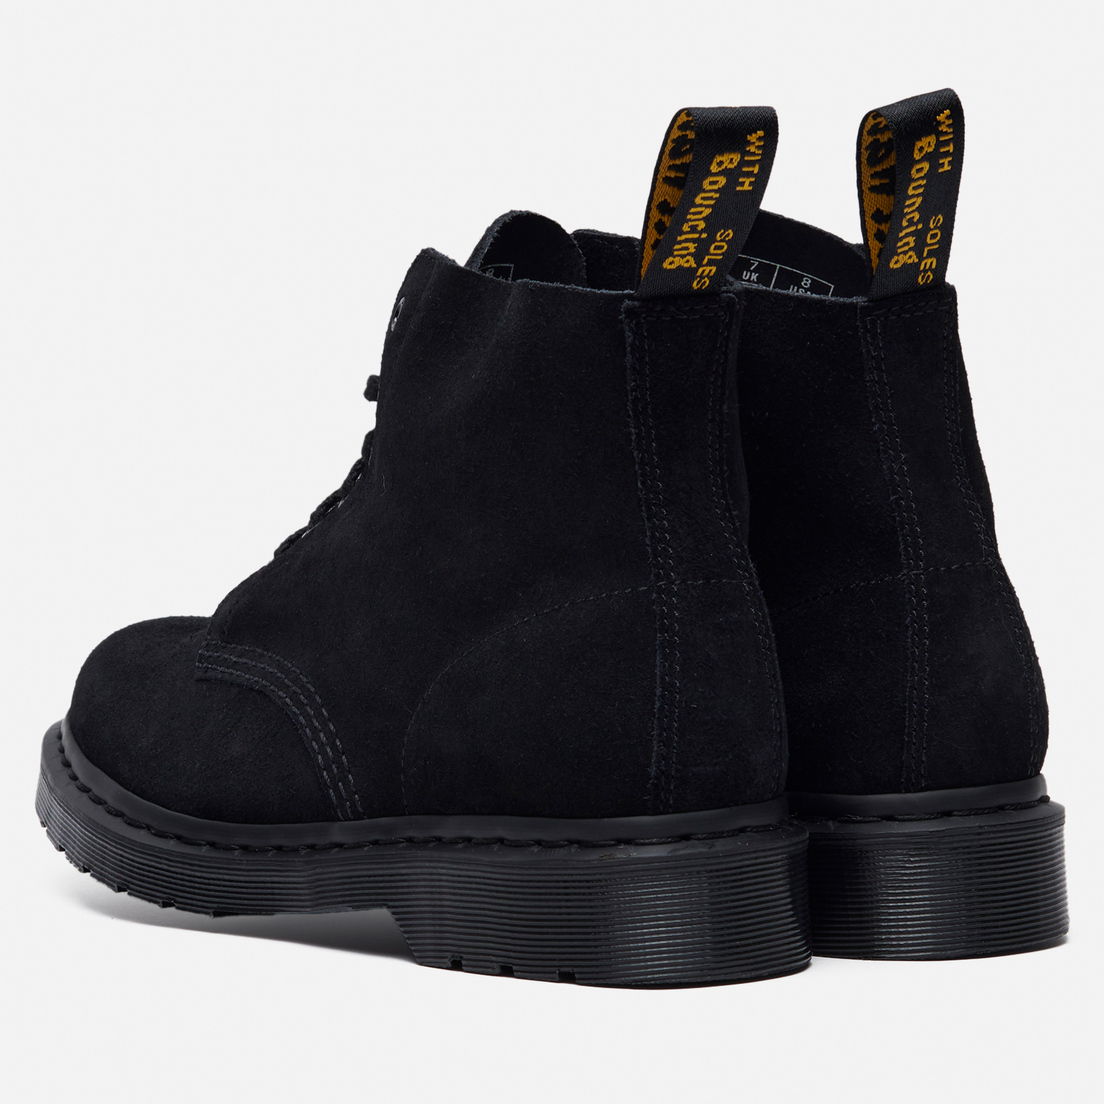 Dr. Martens Ботинки 101 Mono Suede Ankle